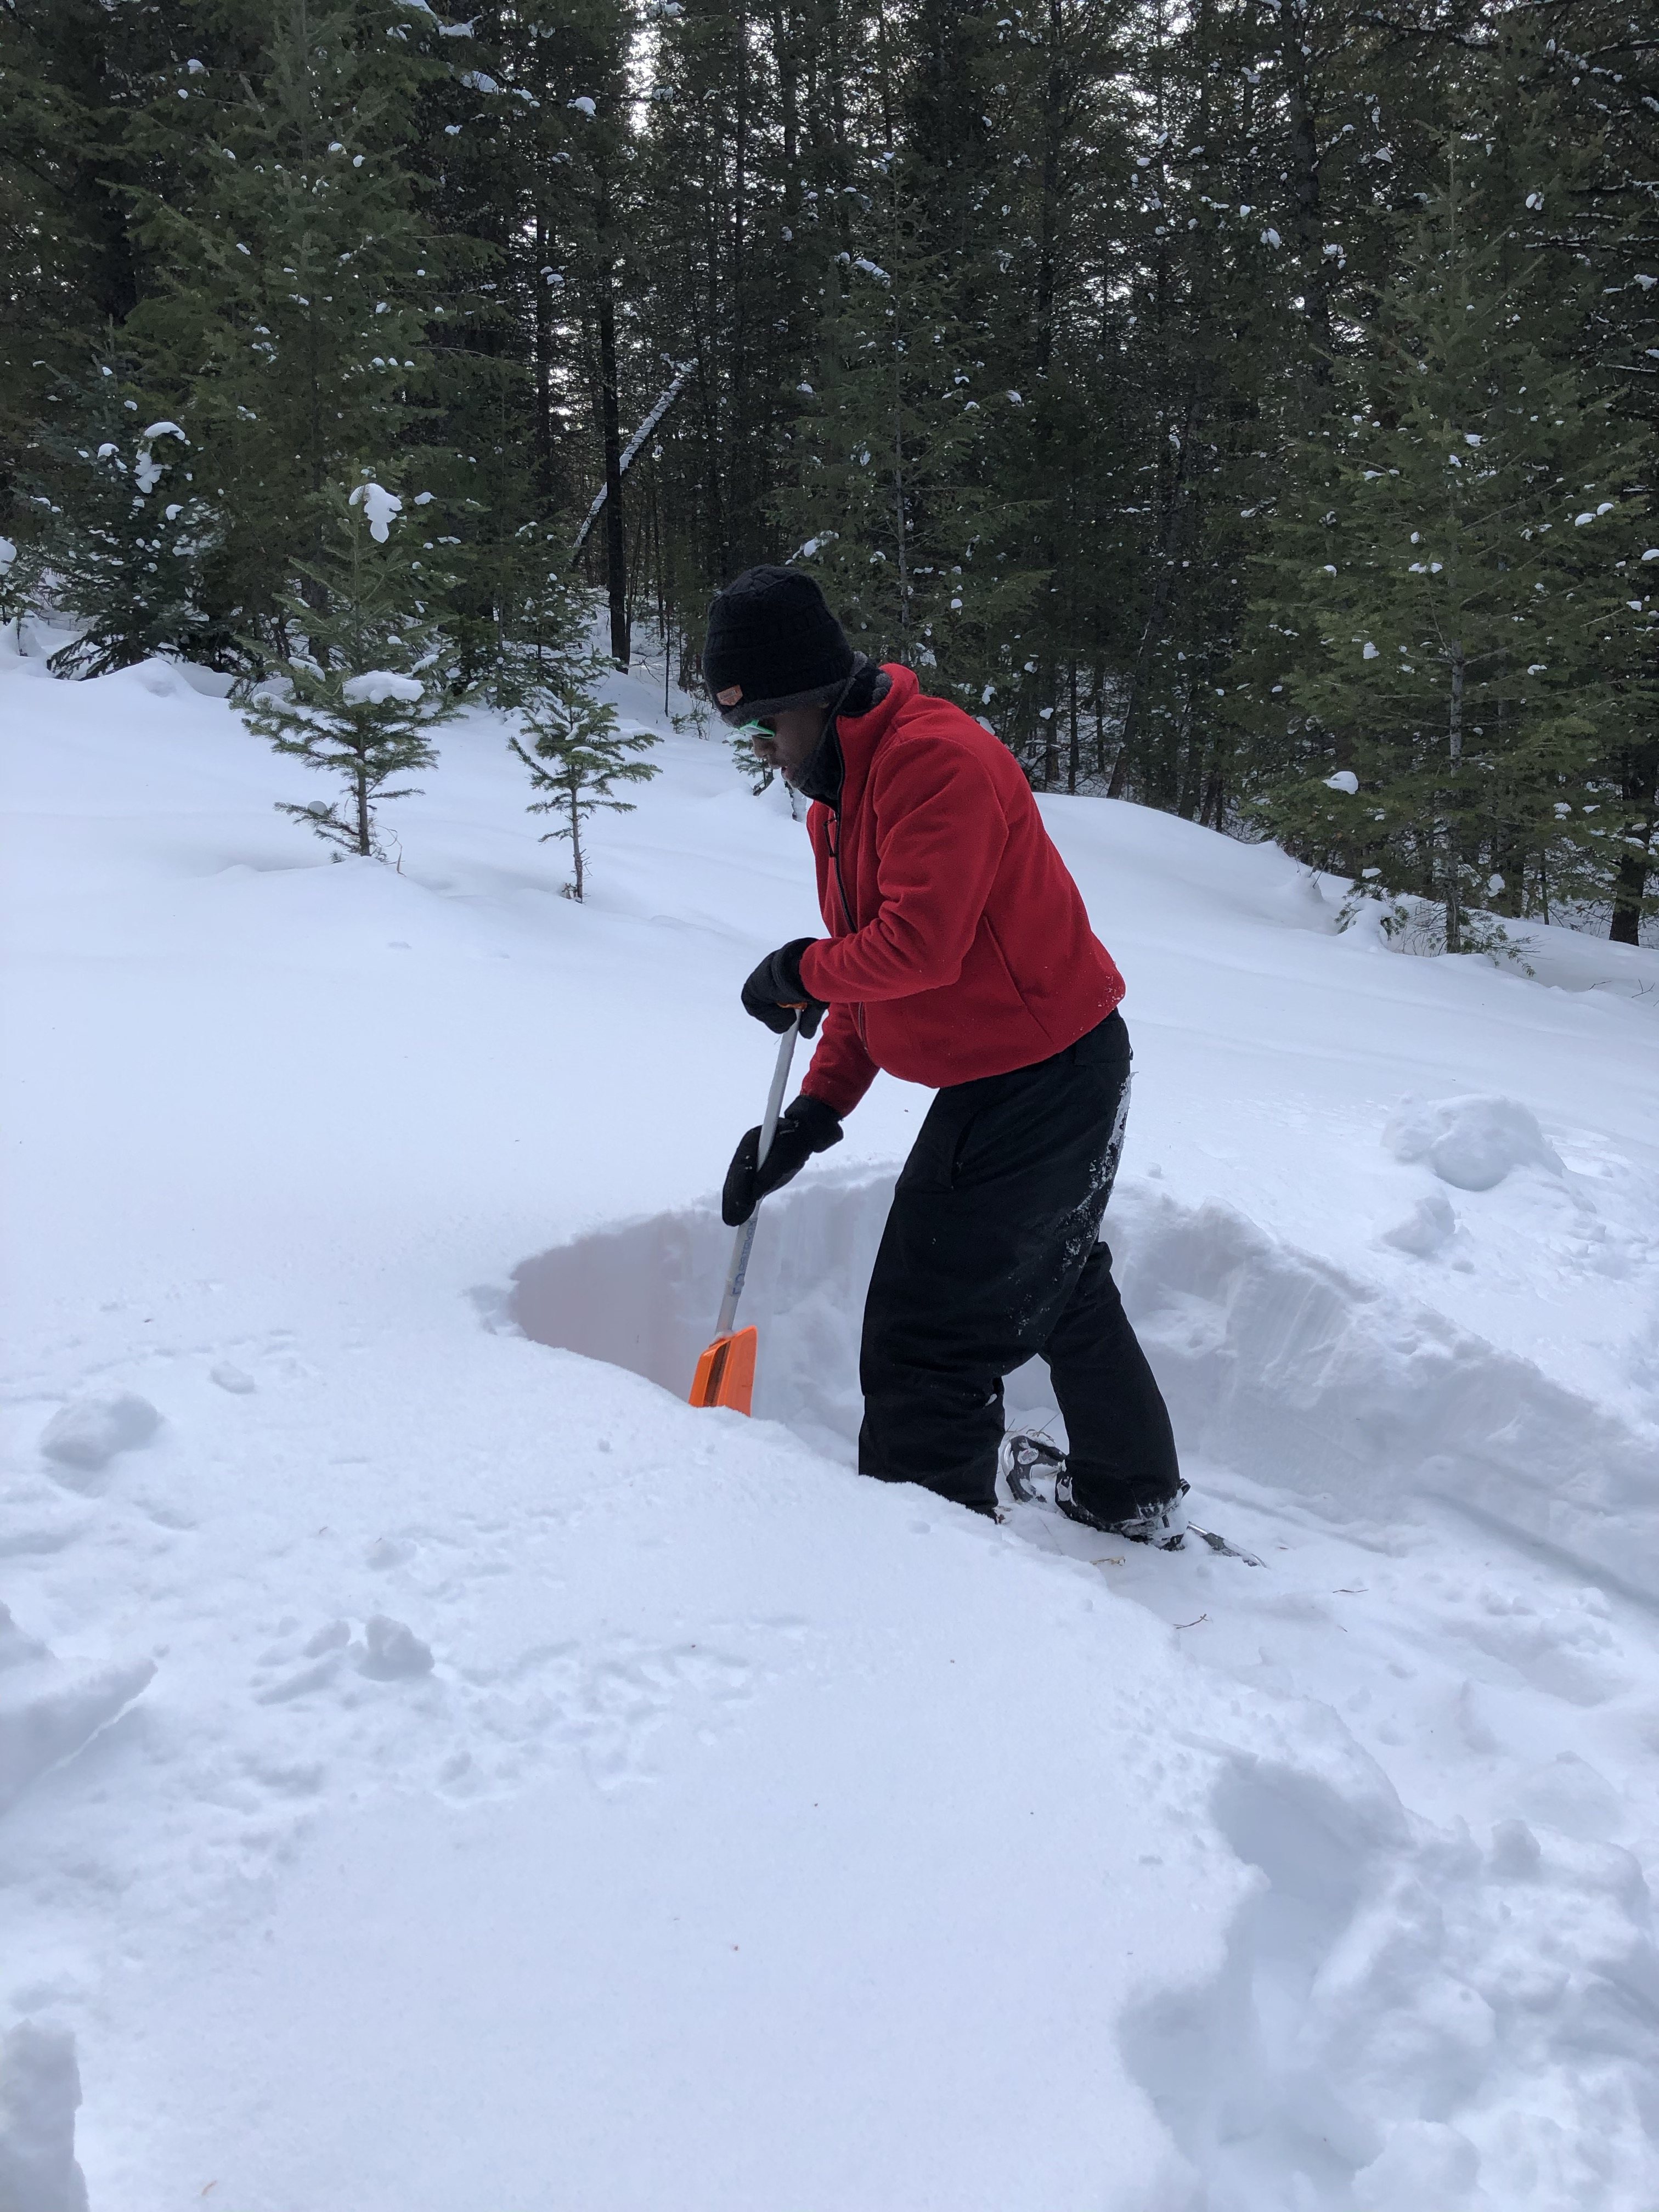 Jay digs a snow pit